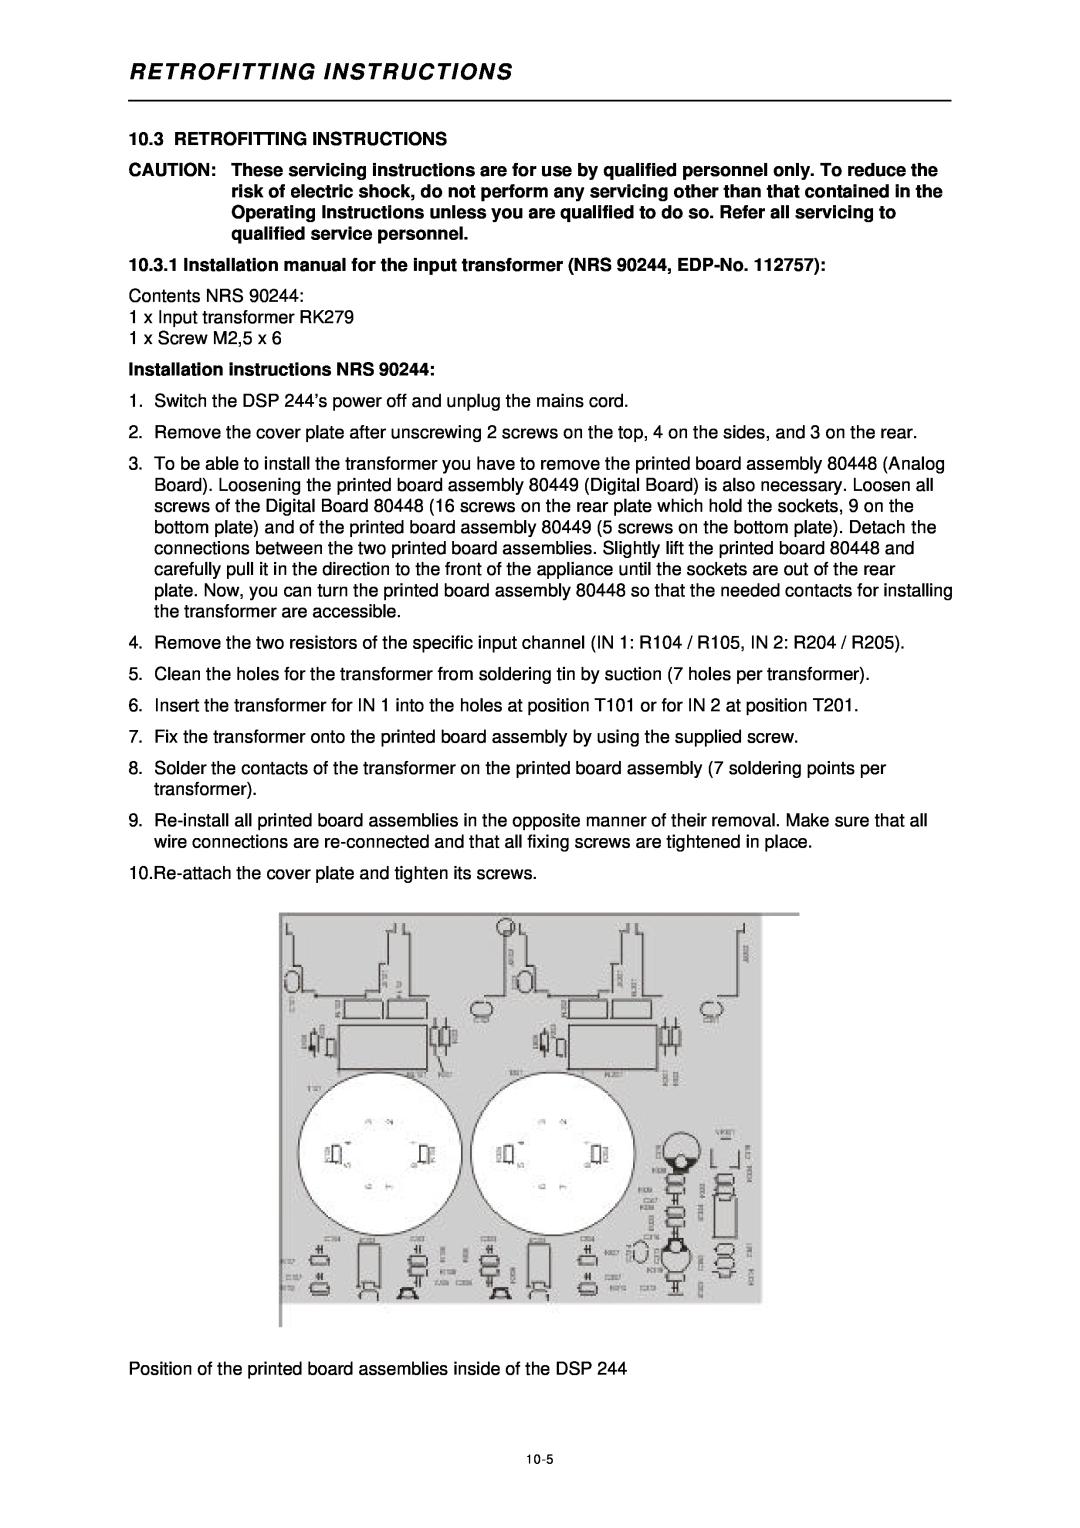 Dynacord DSP 244 owner manual Retrofitting Instructions, Installation instructions NRS 